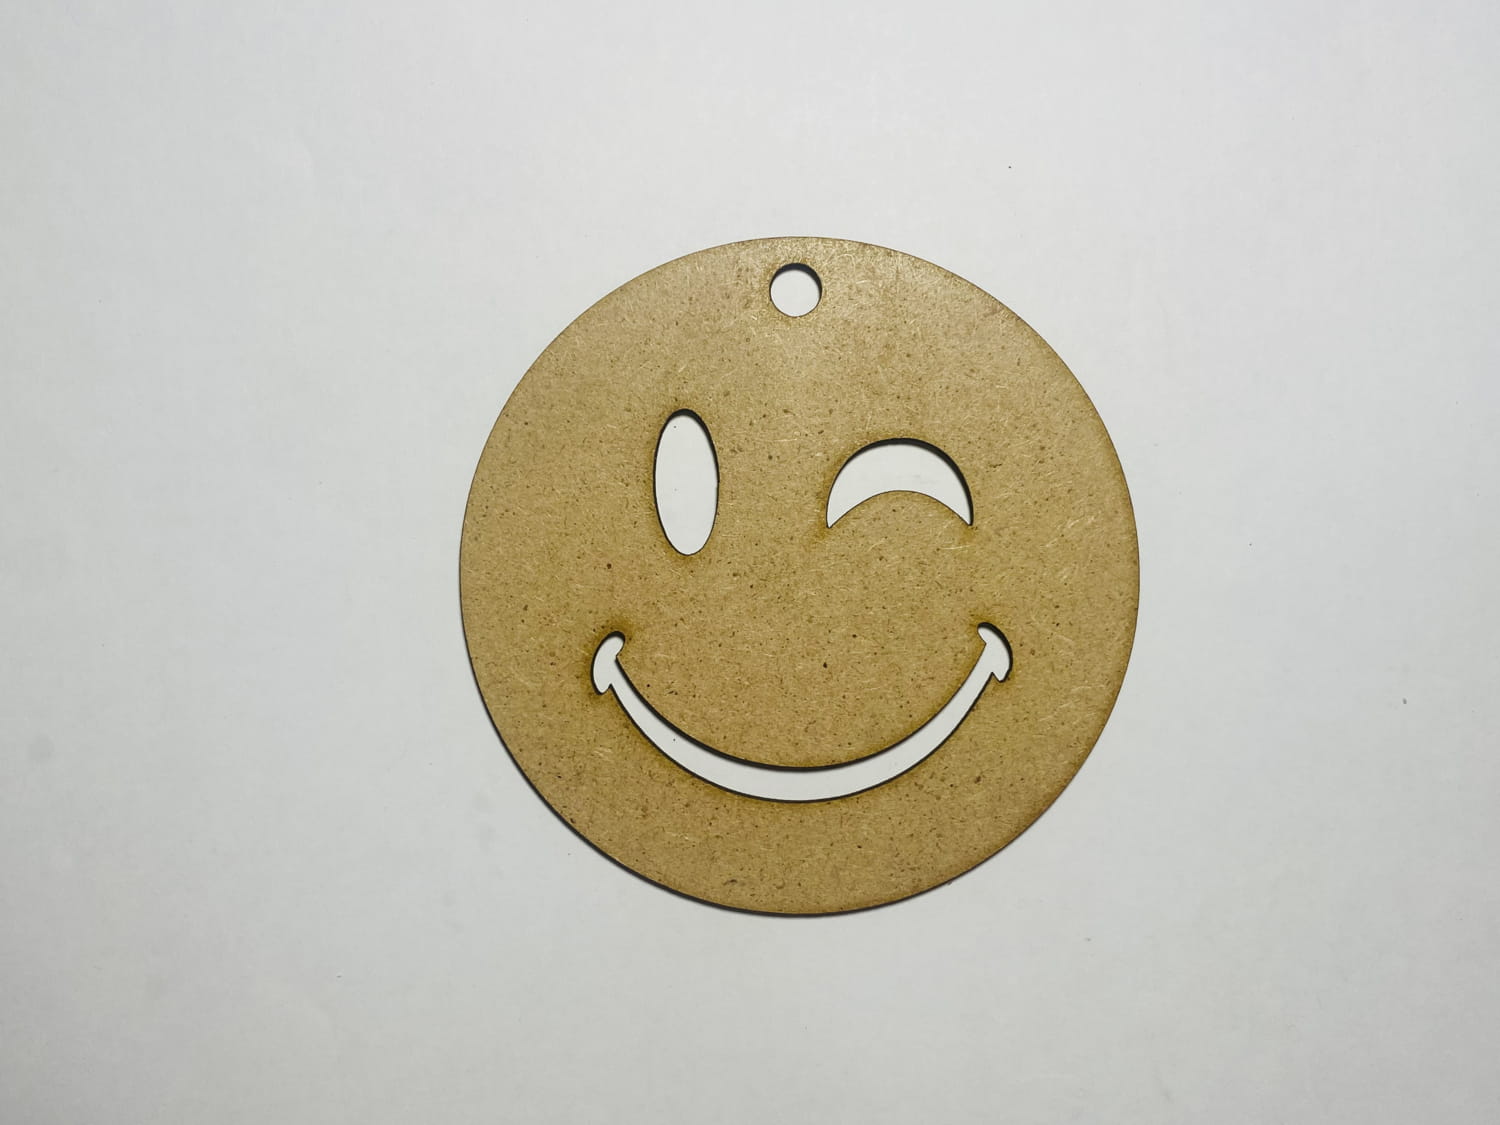 Laser Cut Unfinished Wood Smiley Cutout Craft Free Vector